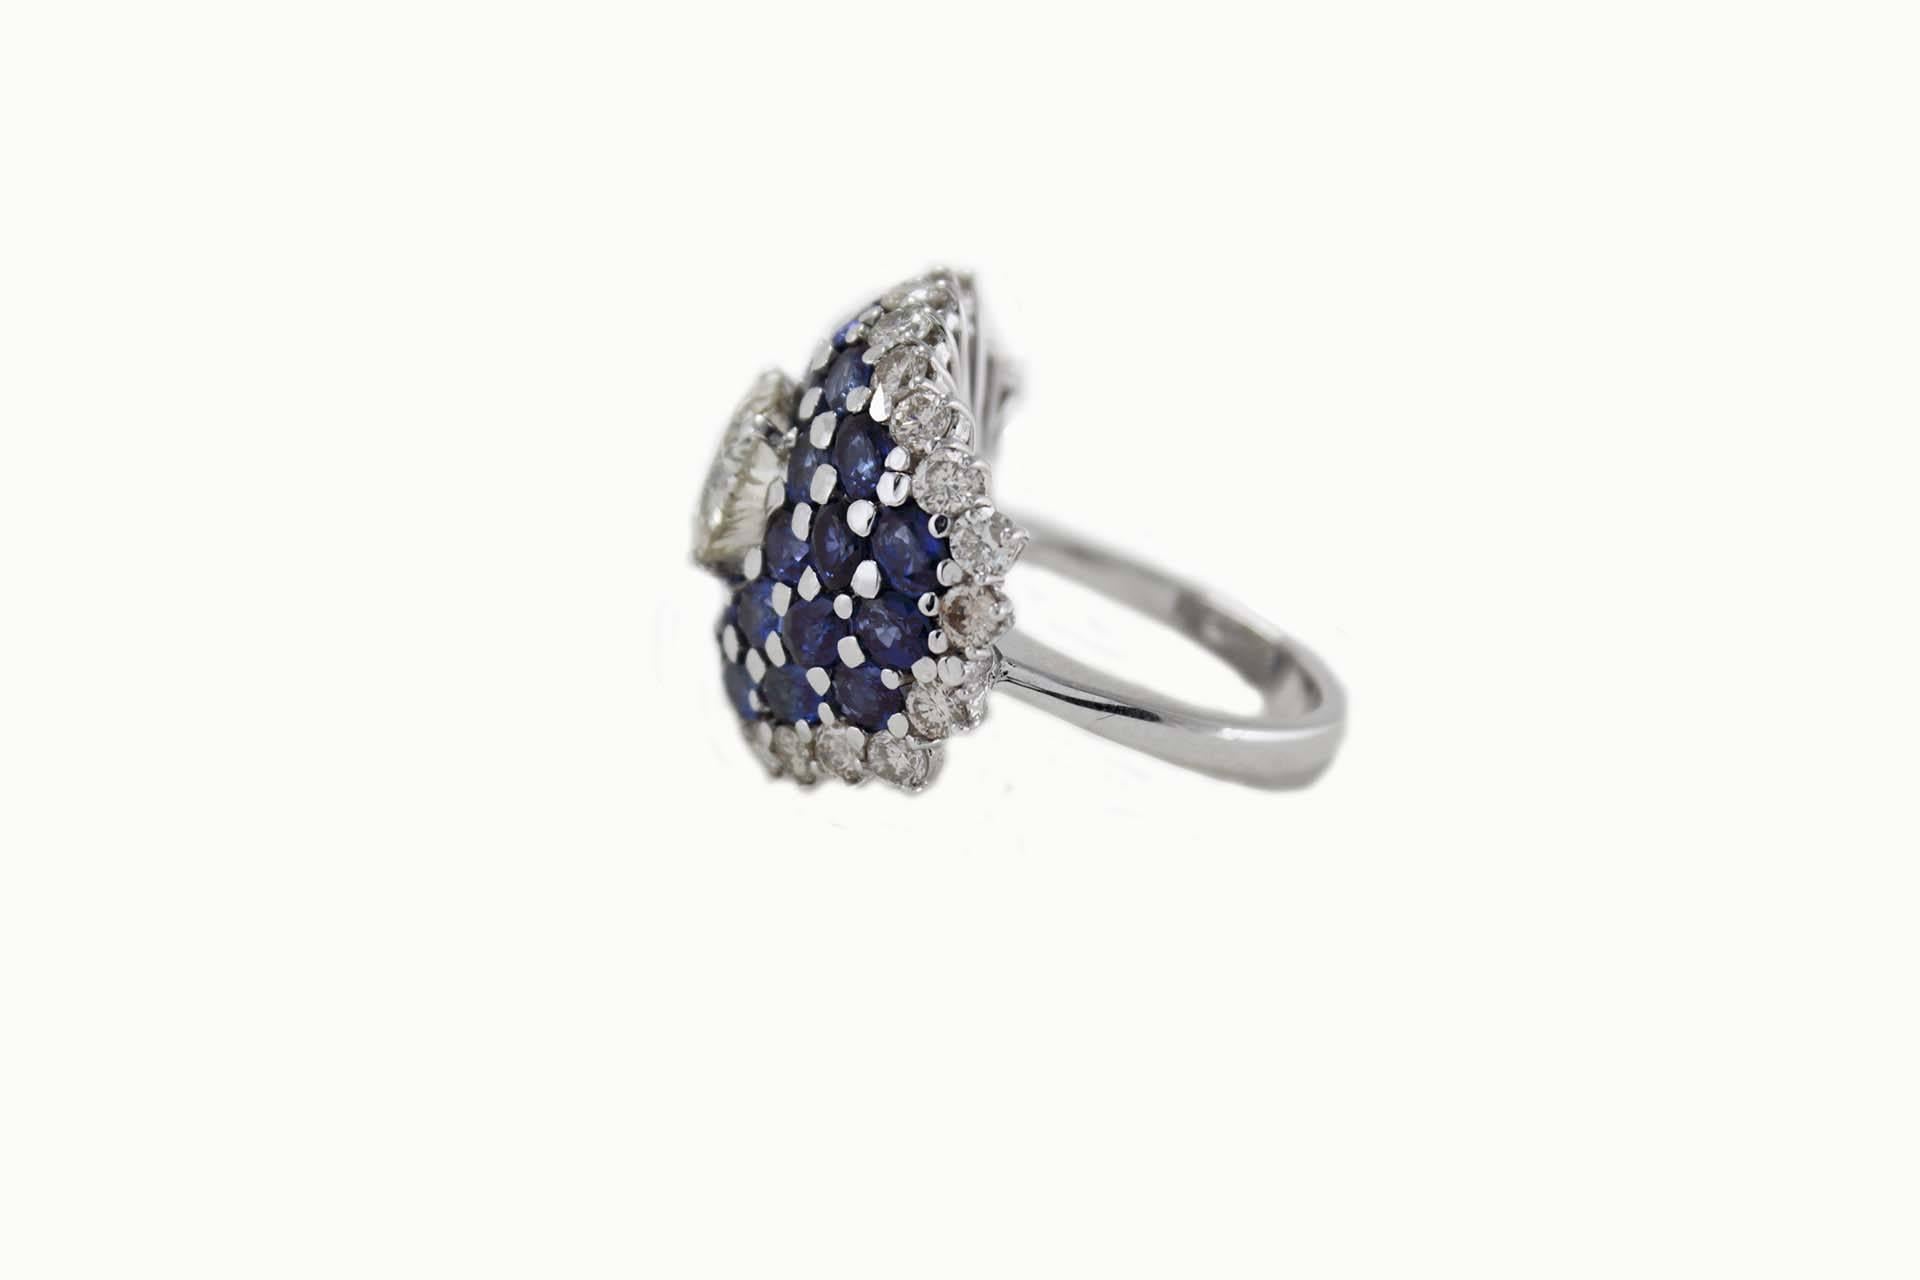 Magnificent ring in 18Kt white gold covered in diamonds and blue sapphire that surround a cut diamond
diamonds (2.23Kt), 
blue sapphire (6.01 Kt) 
cut diamond (2.1 Kt). 
tot weight 15.6 gr
Rf. 5249057

For any enquires, please contact the seller